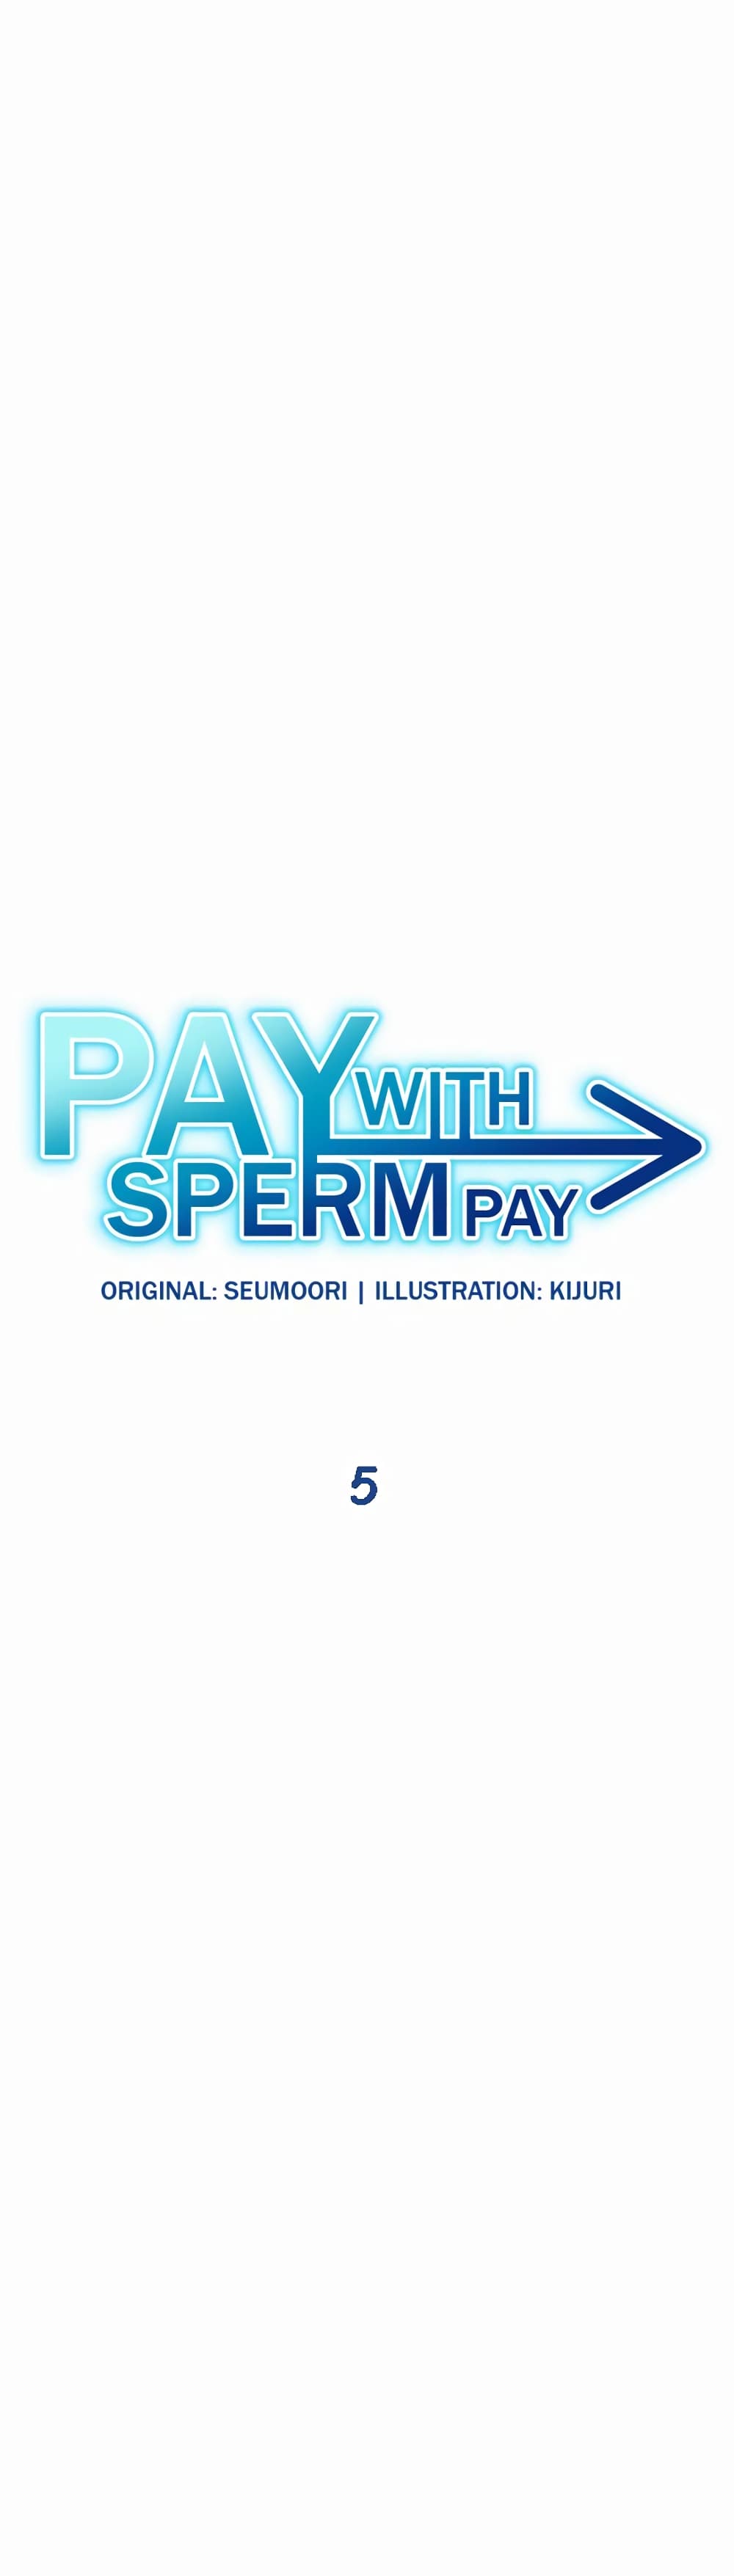 Pay with Sperm Pay 5 (1)